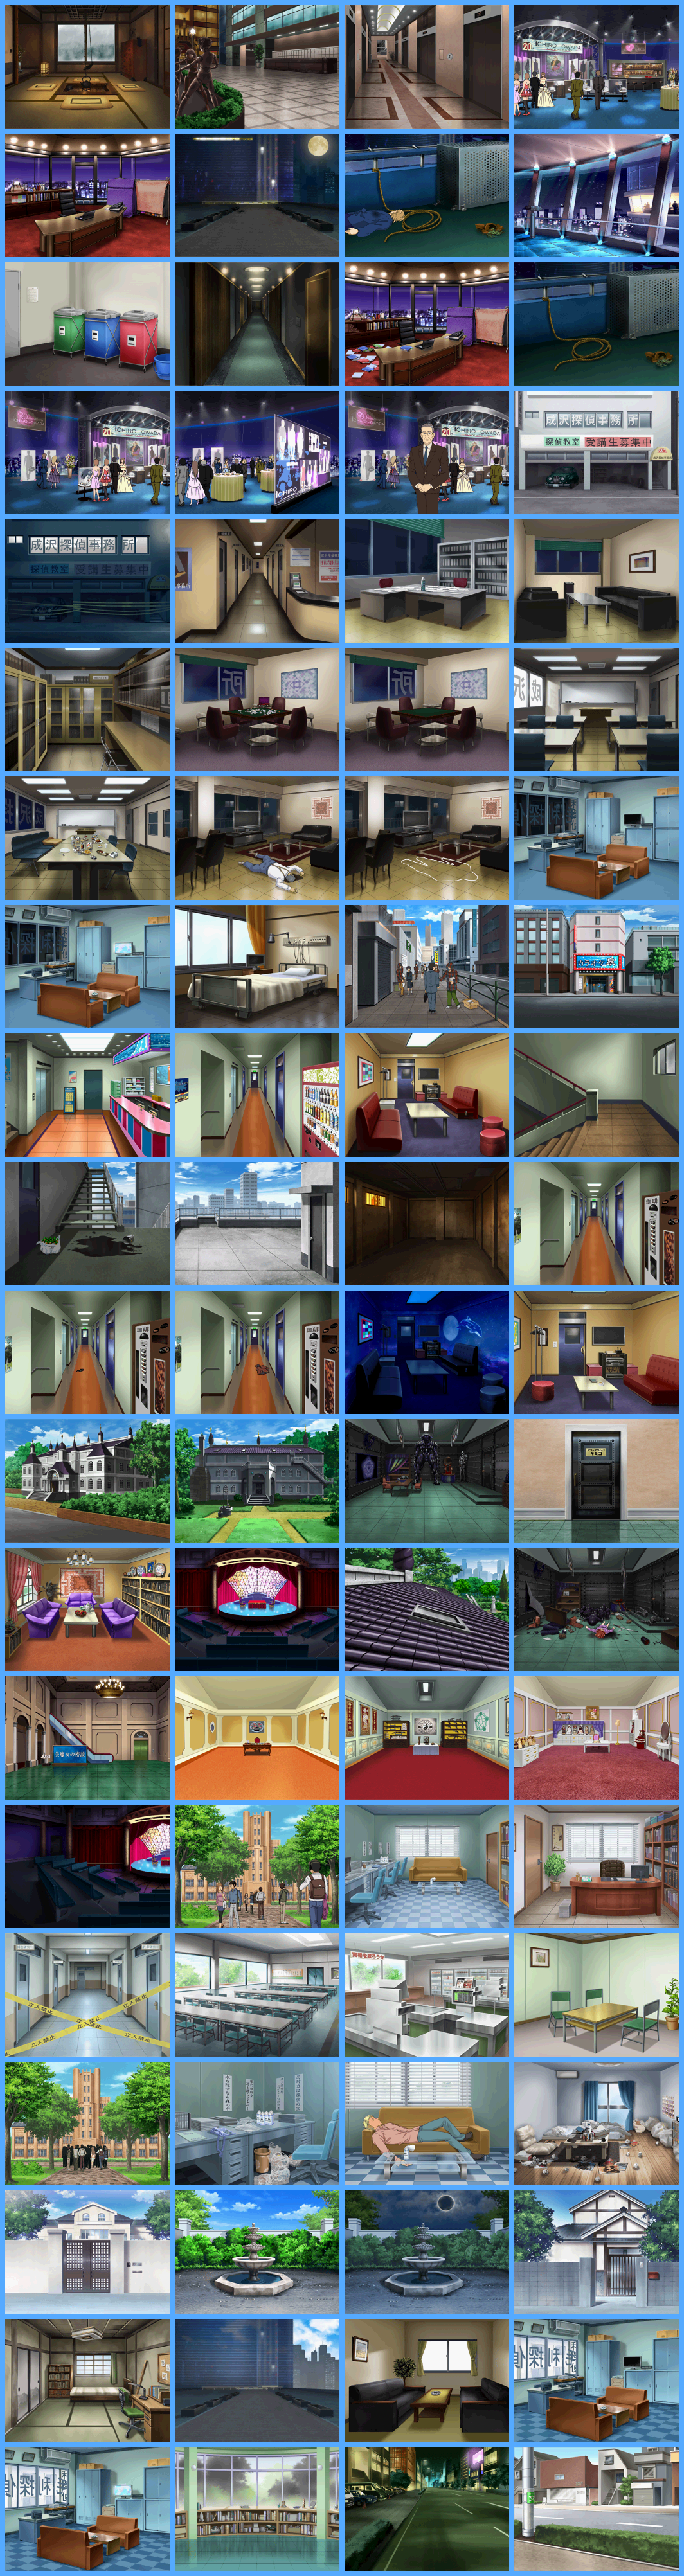 Detective Conan: Prelude from the Past - Backgrounds